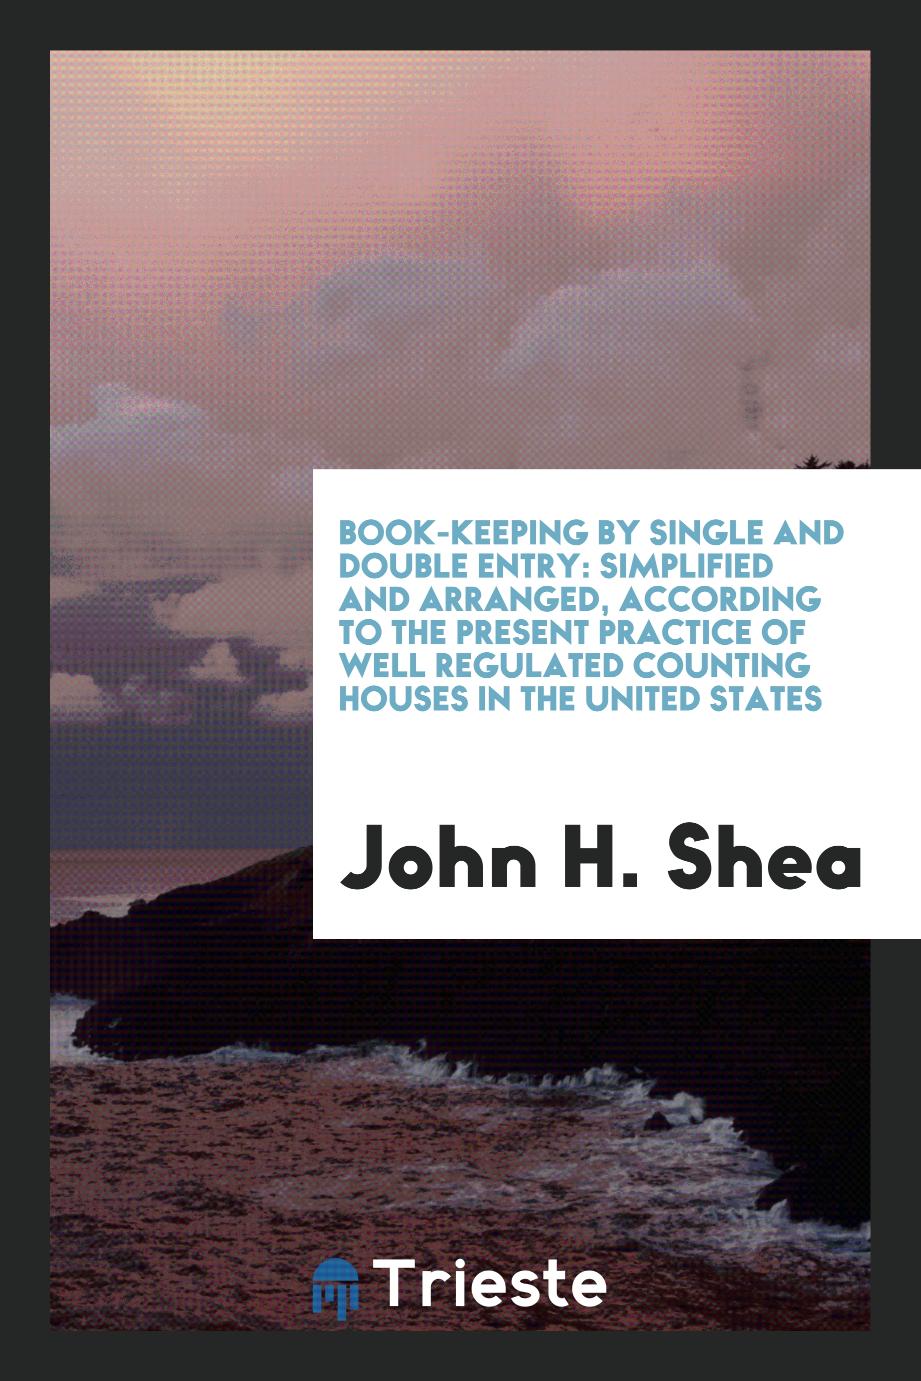 Book-Keeping by Single and Double Entry: Simplified and Arranged, According to the Present Practice of Well Regulated Counting Houses in the United States